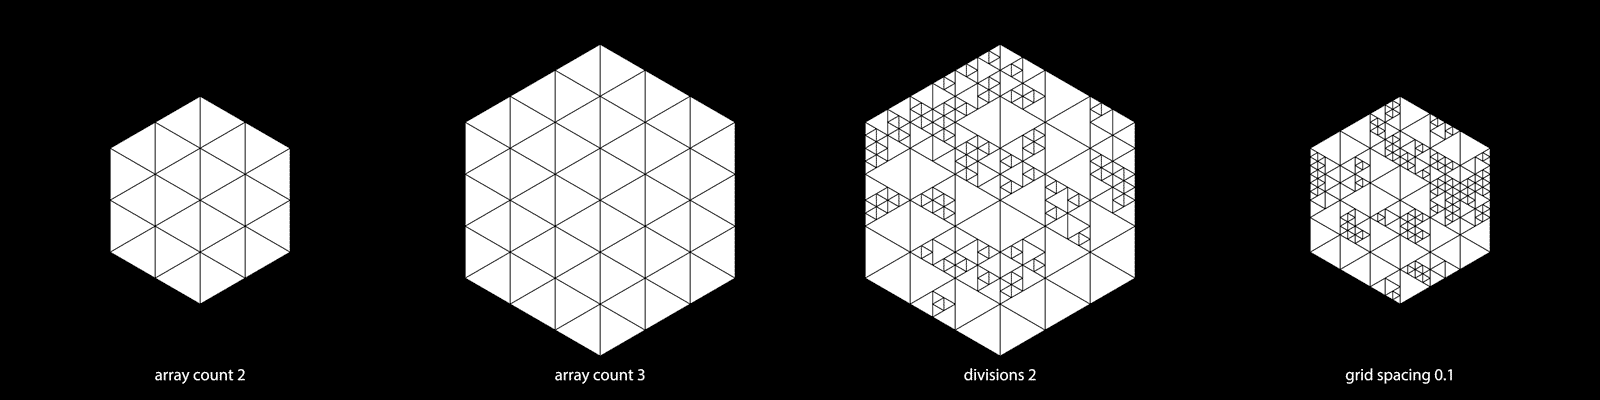 examples of settings for the tri-hex array